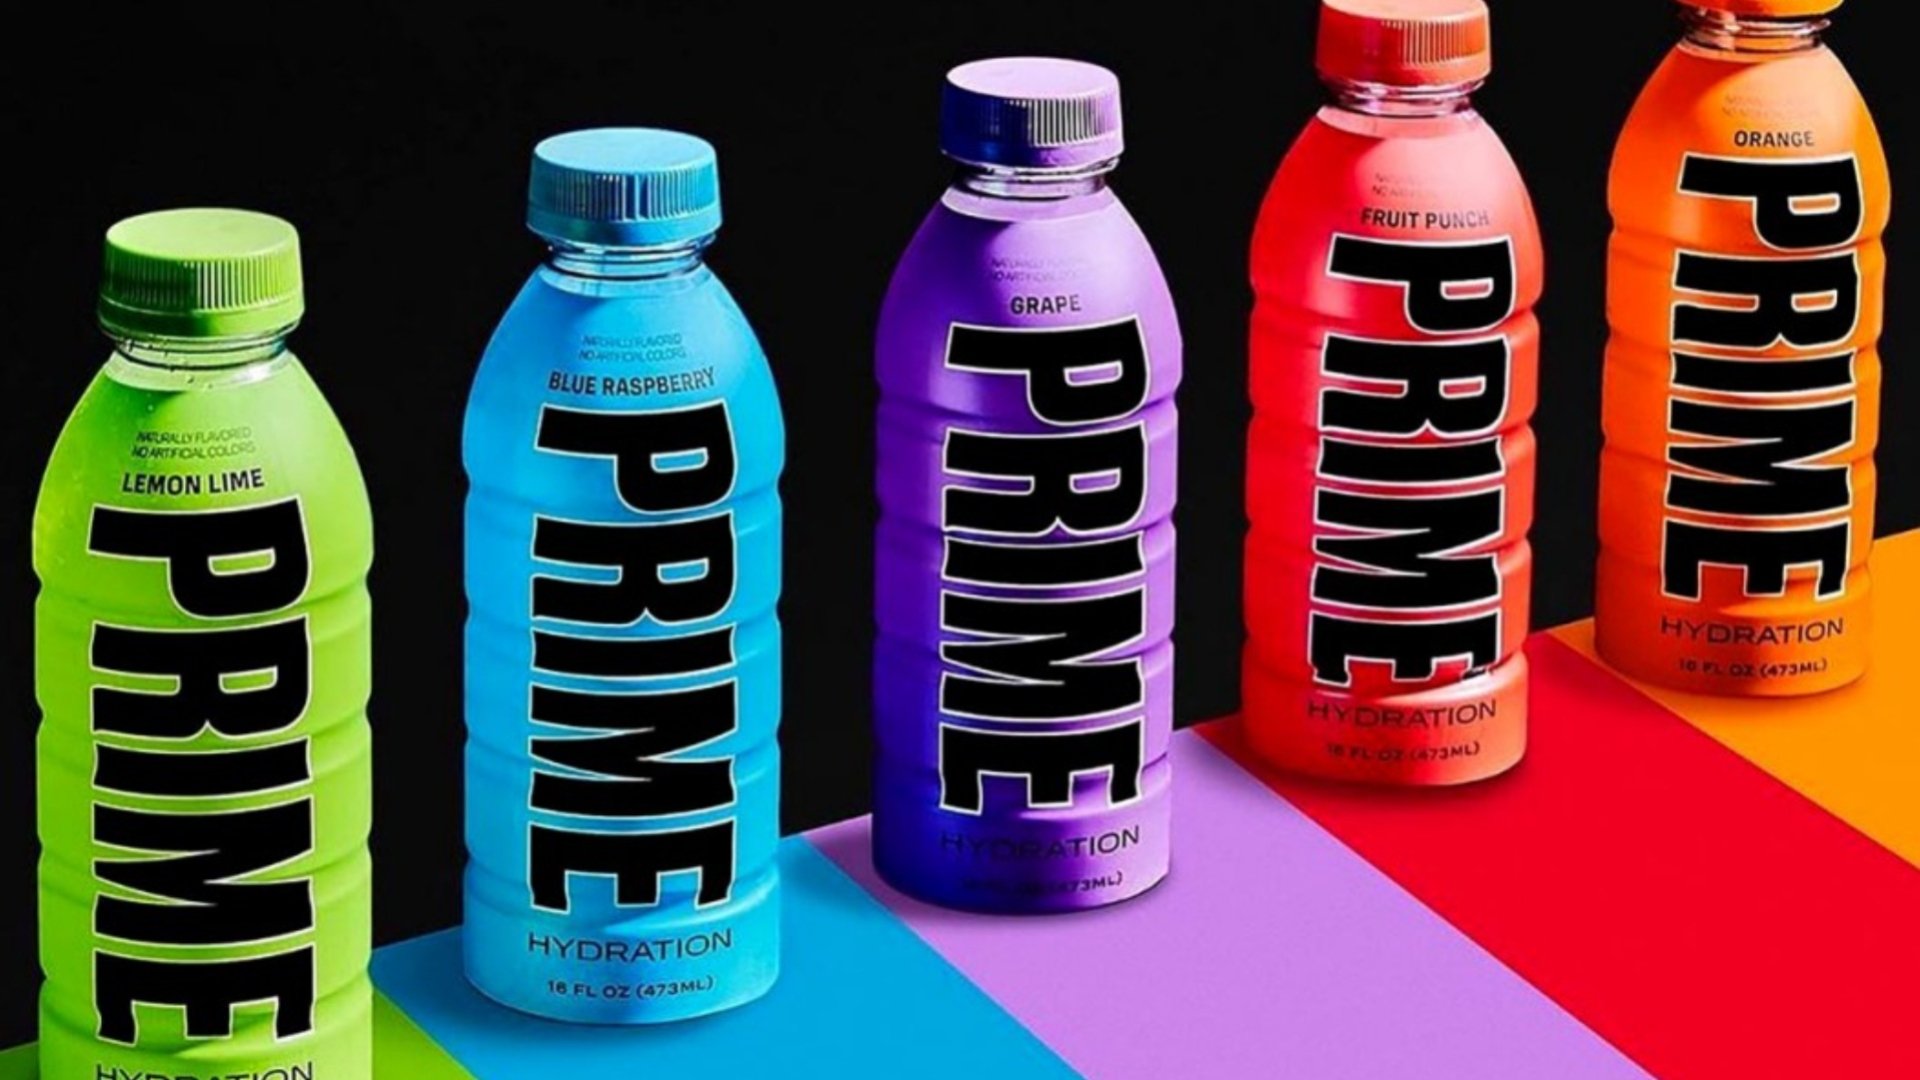 Where to buy Prime hydration drink after it SELLS OUT in Scotland's Asda stores. The Scottish Sun